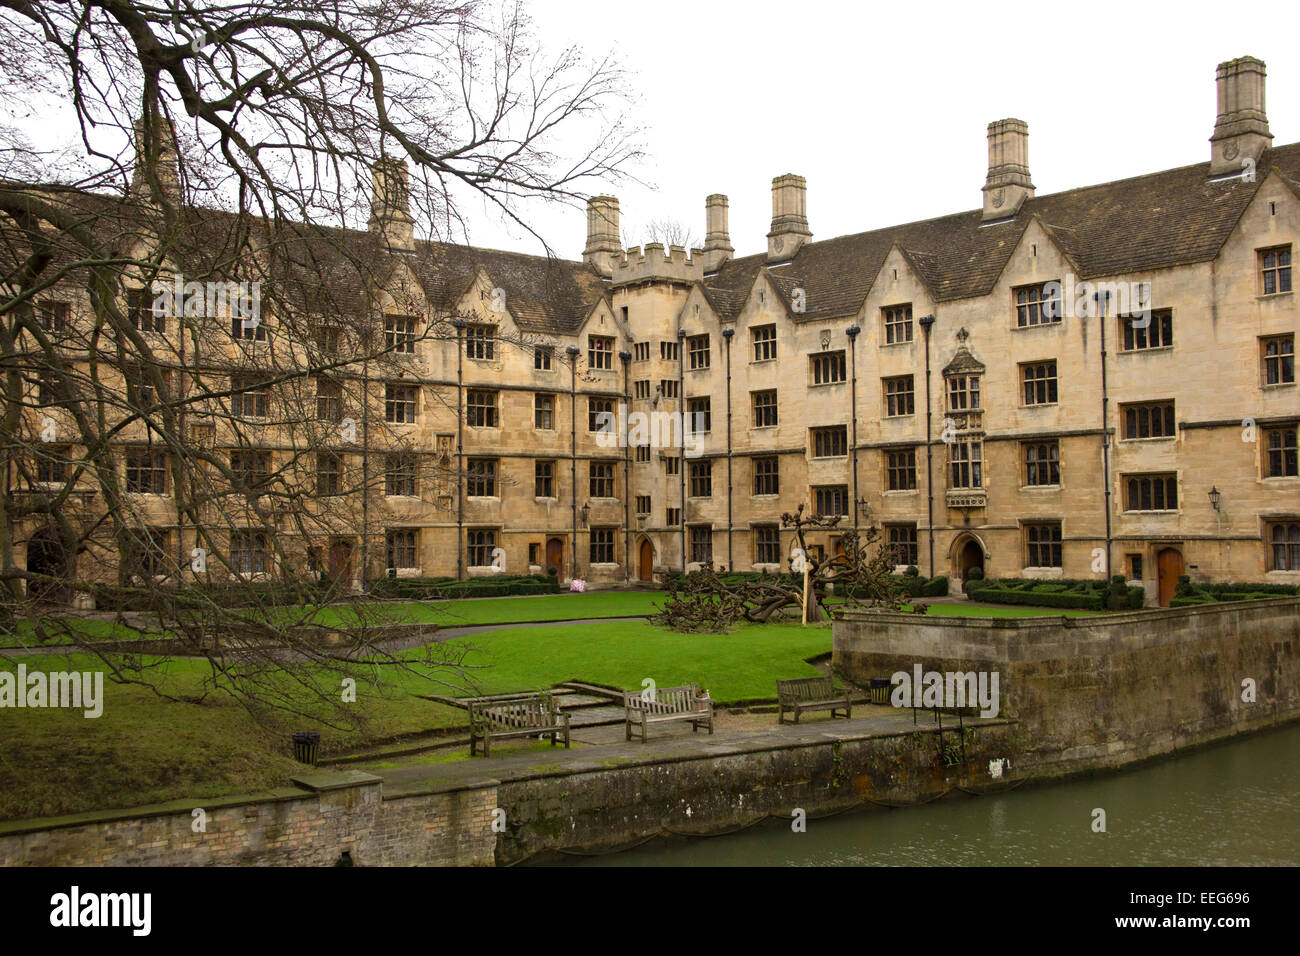 Bodley's Court on King's College campus in Cambridge, England. Stock Photo